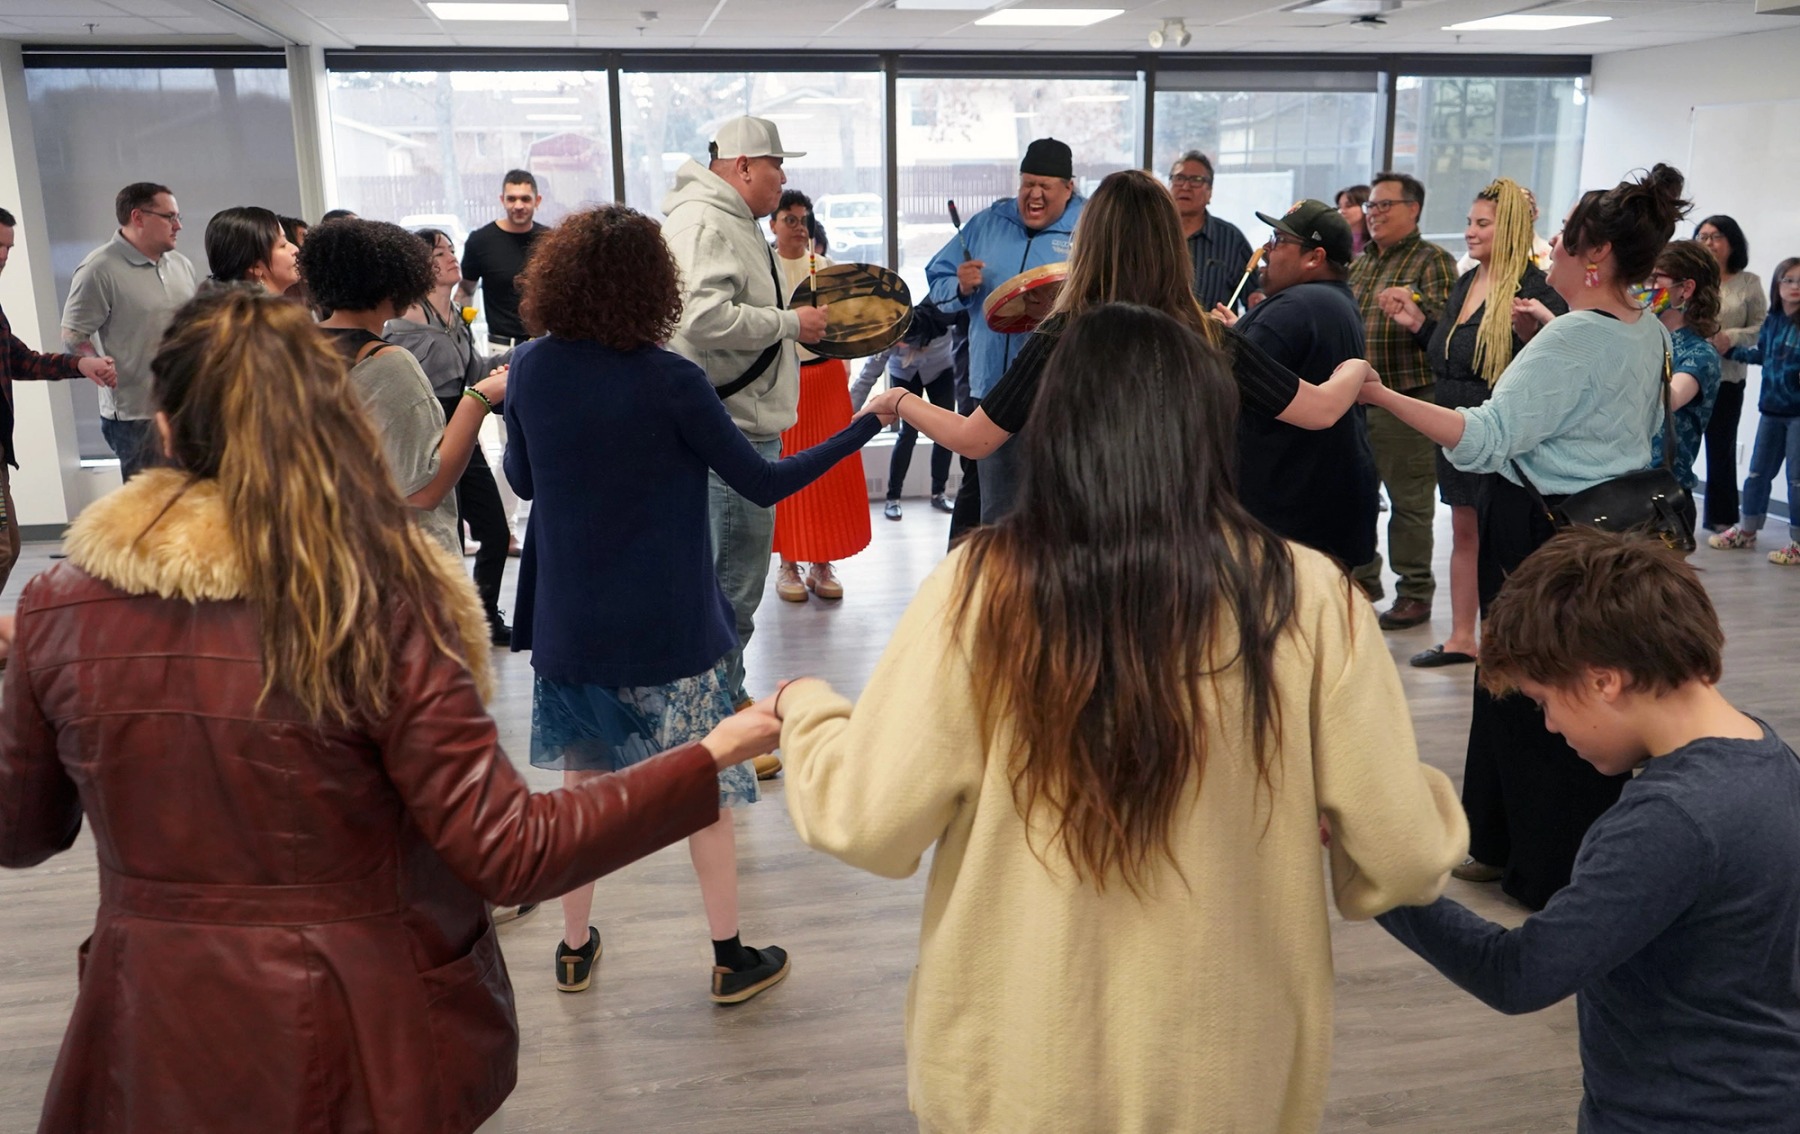 A group of people in the Digital Dreamers program participate in a traditional Indigenous dance.